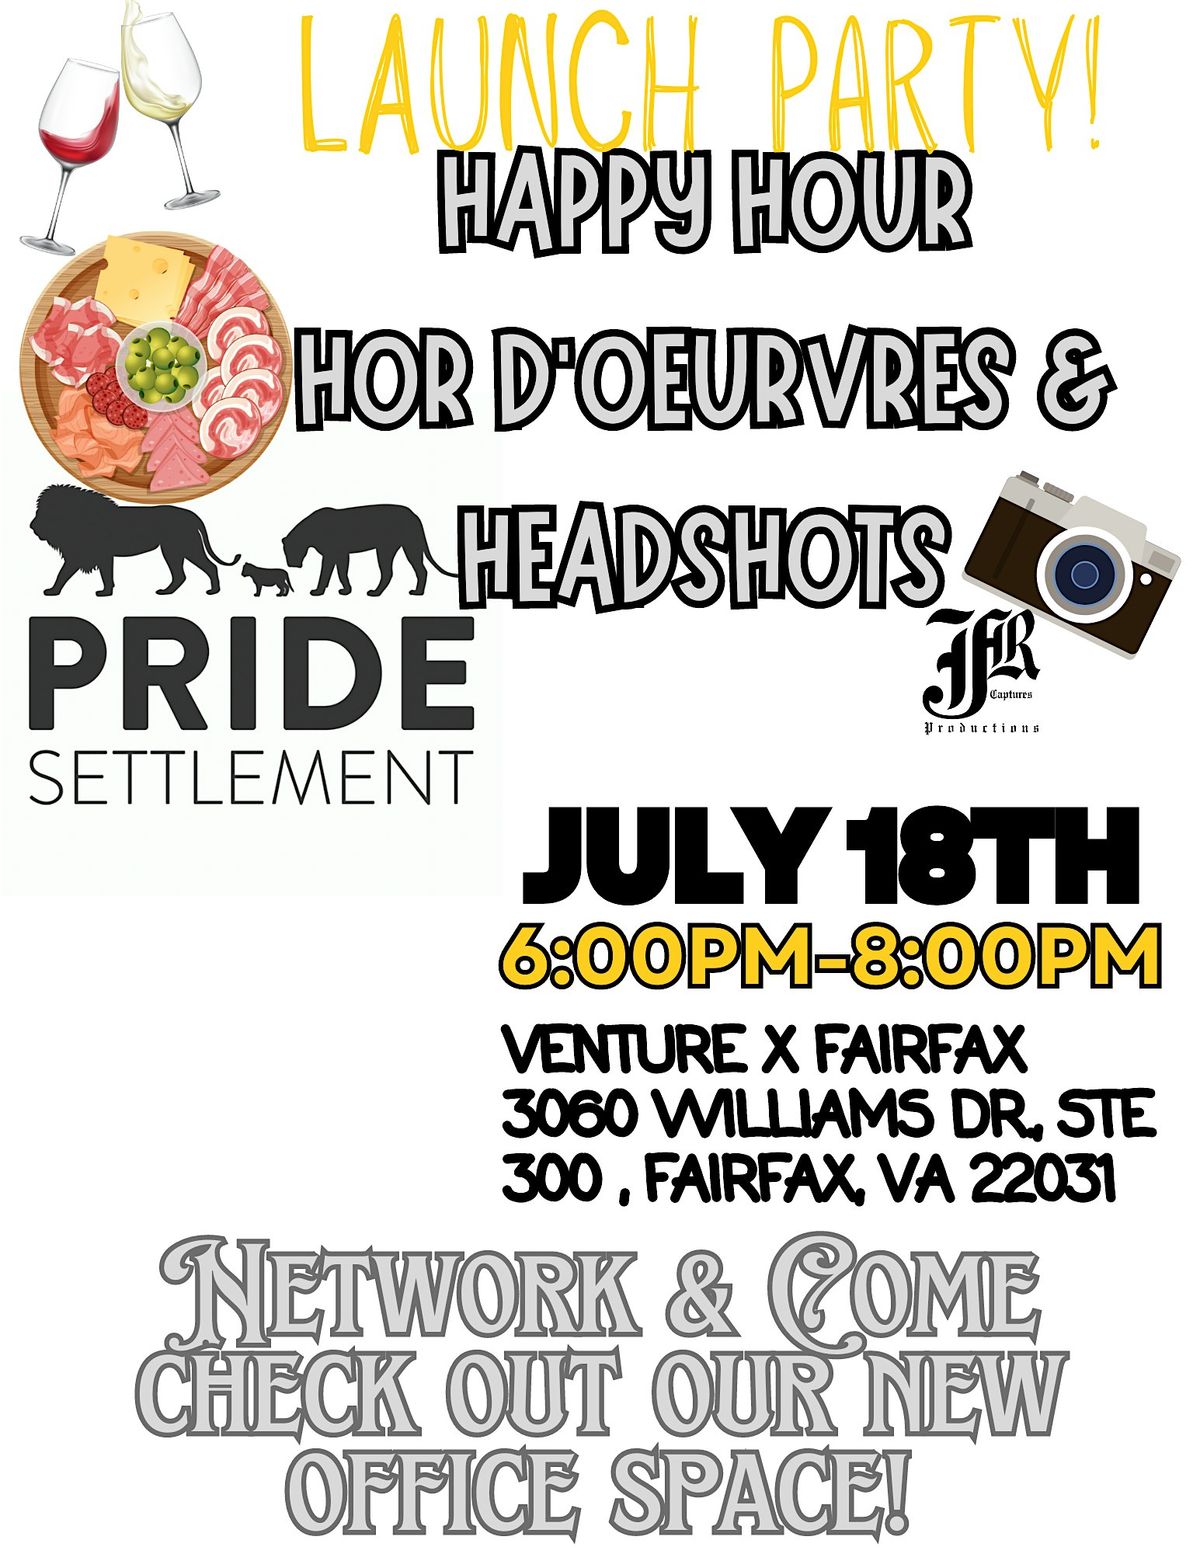 Happy Hour, Hor D'oeurvres & Headshots: Real Estate Networking Launch Party Event